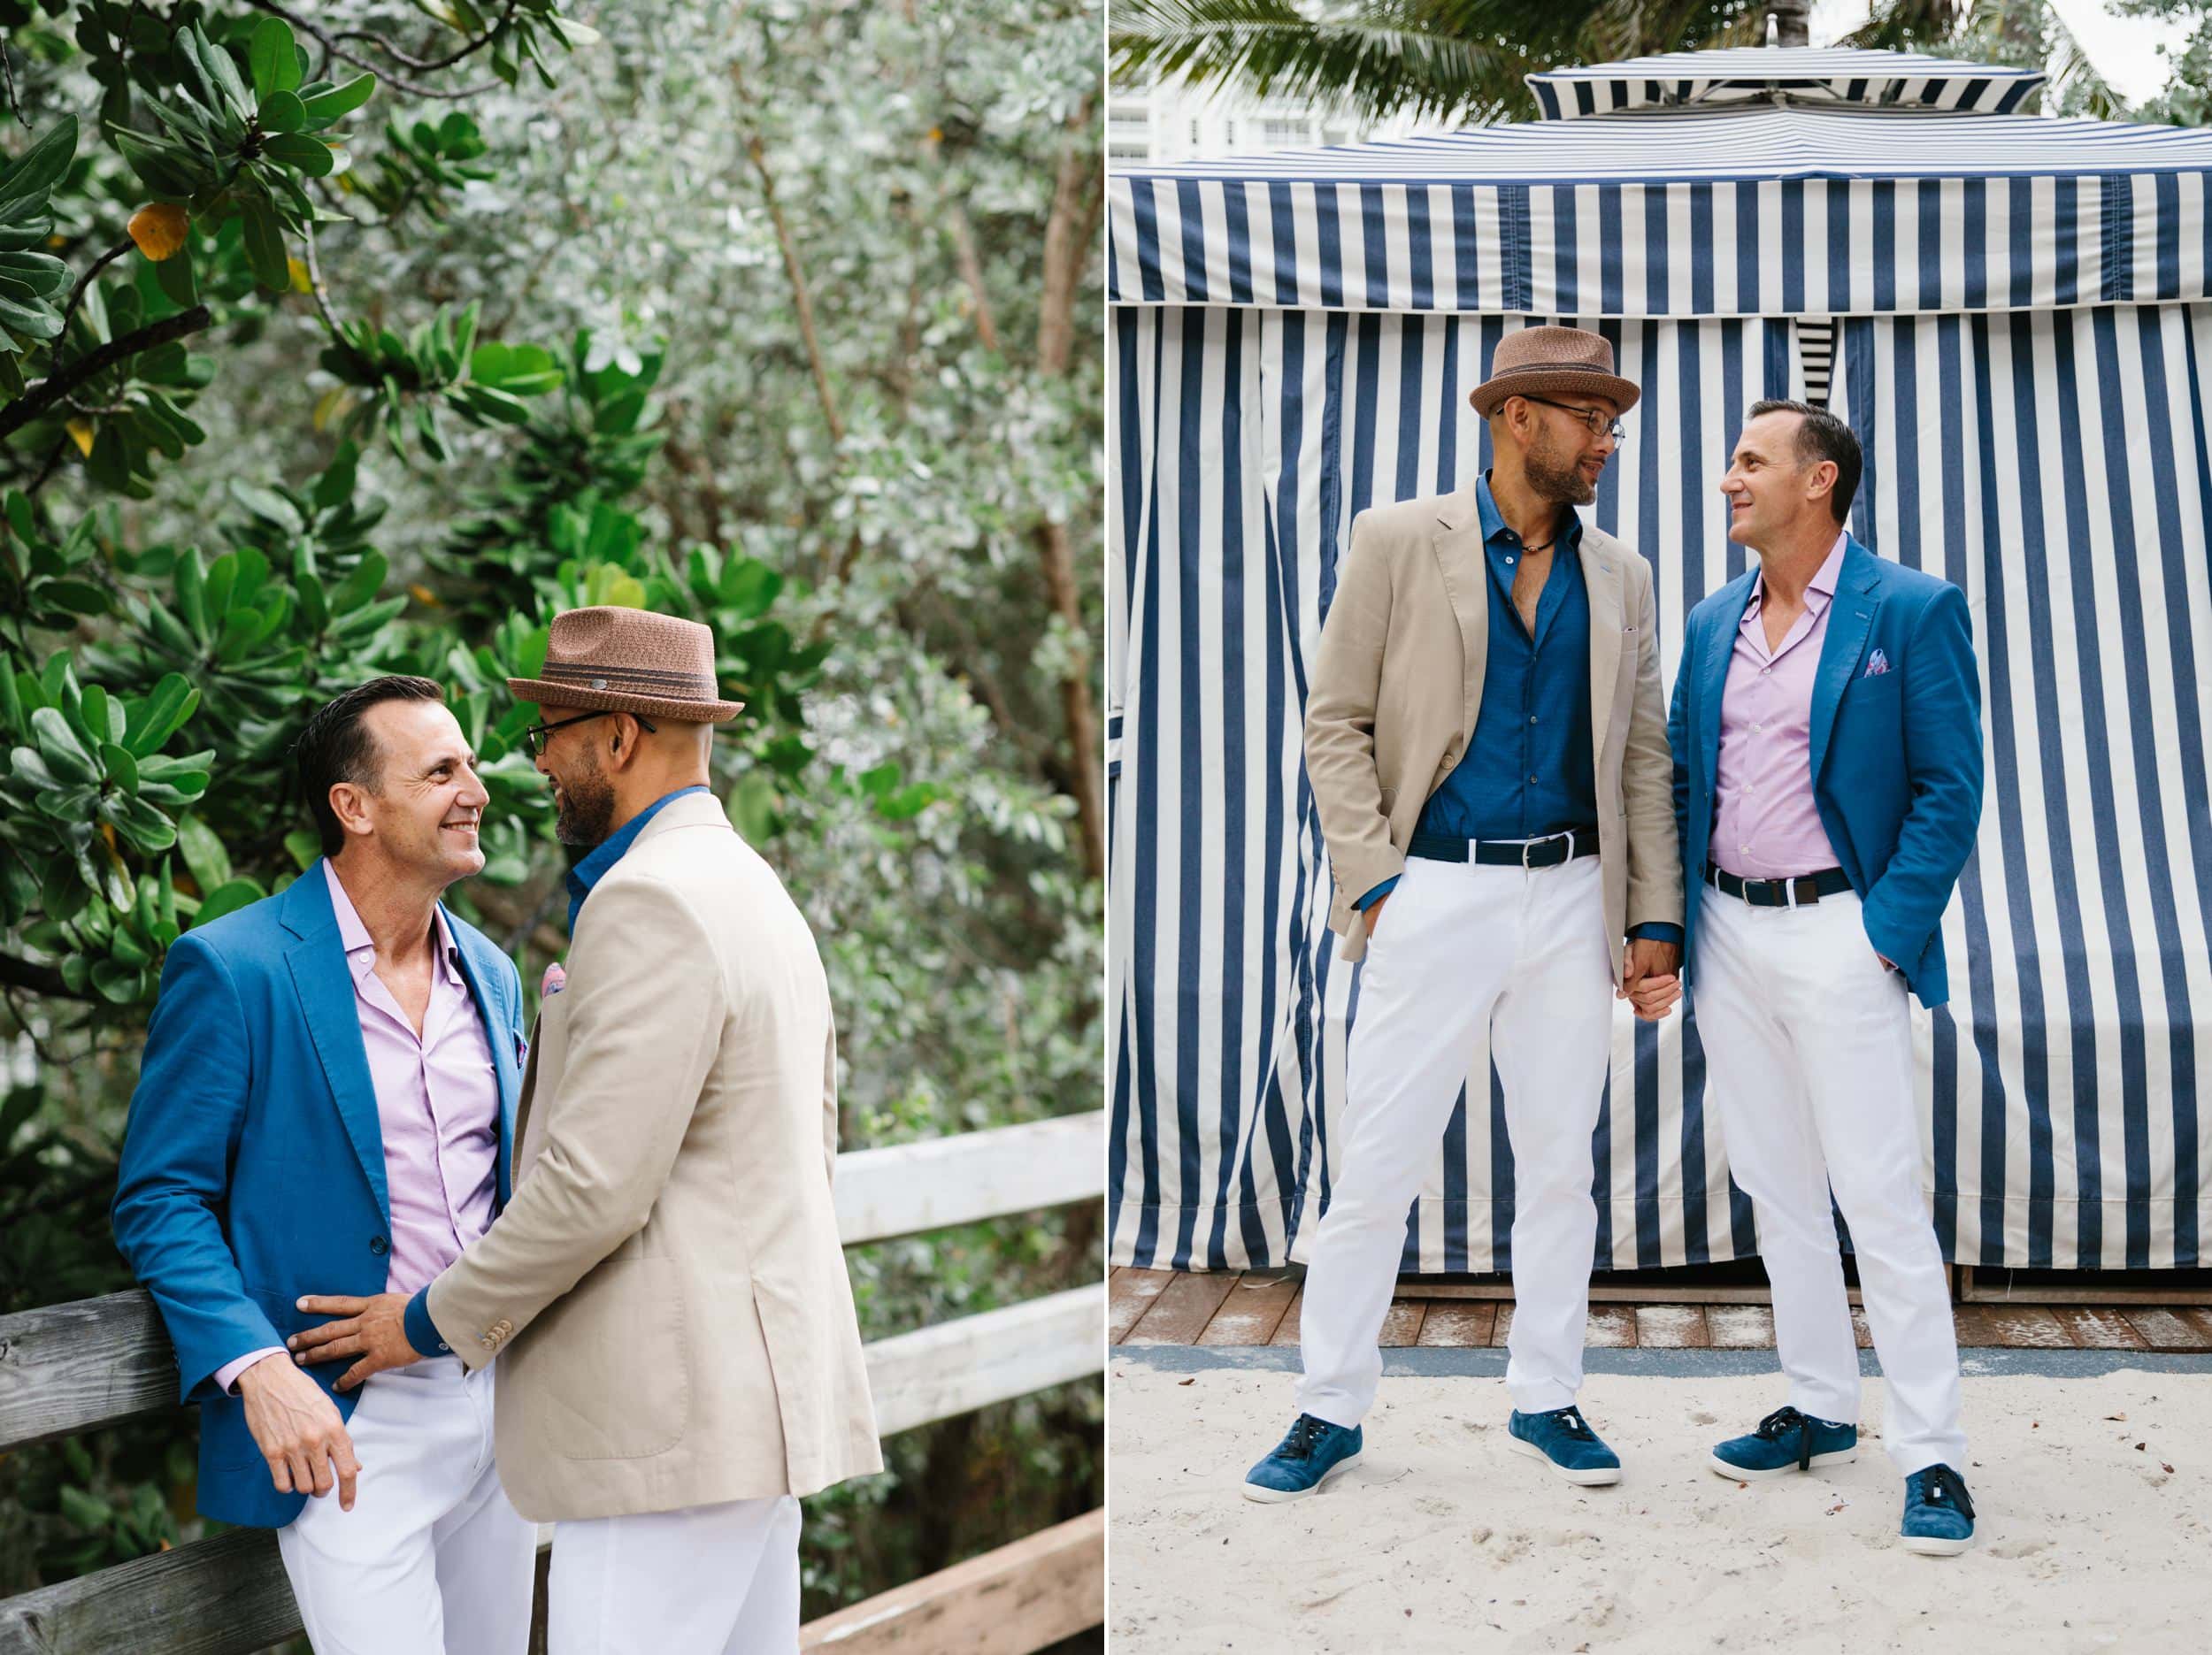 Casual chic wedding at the Cadillac Hotel in Miami beach